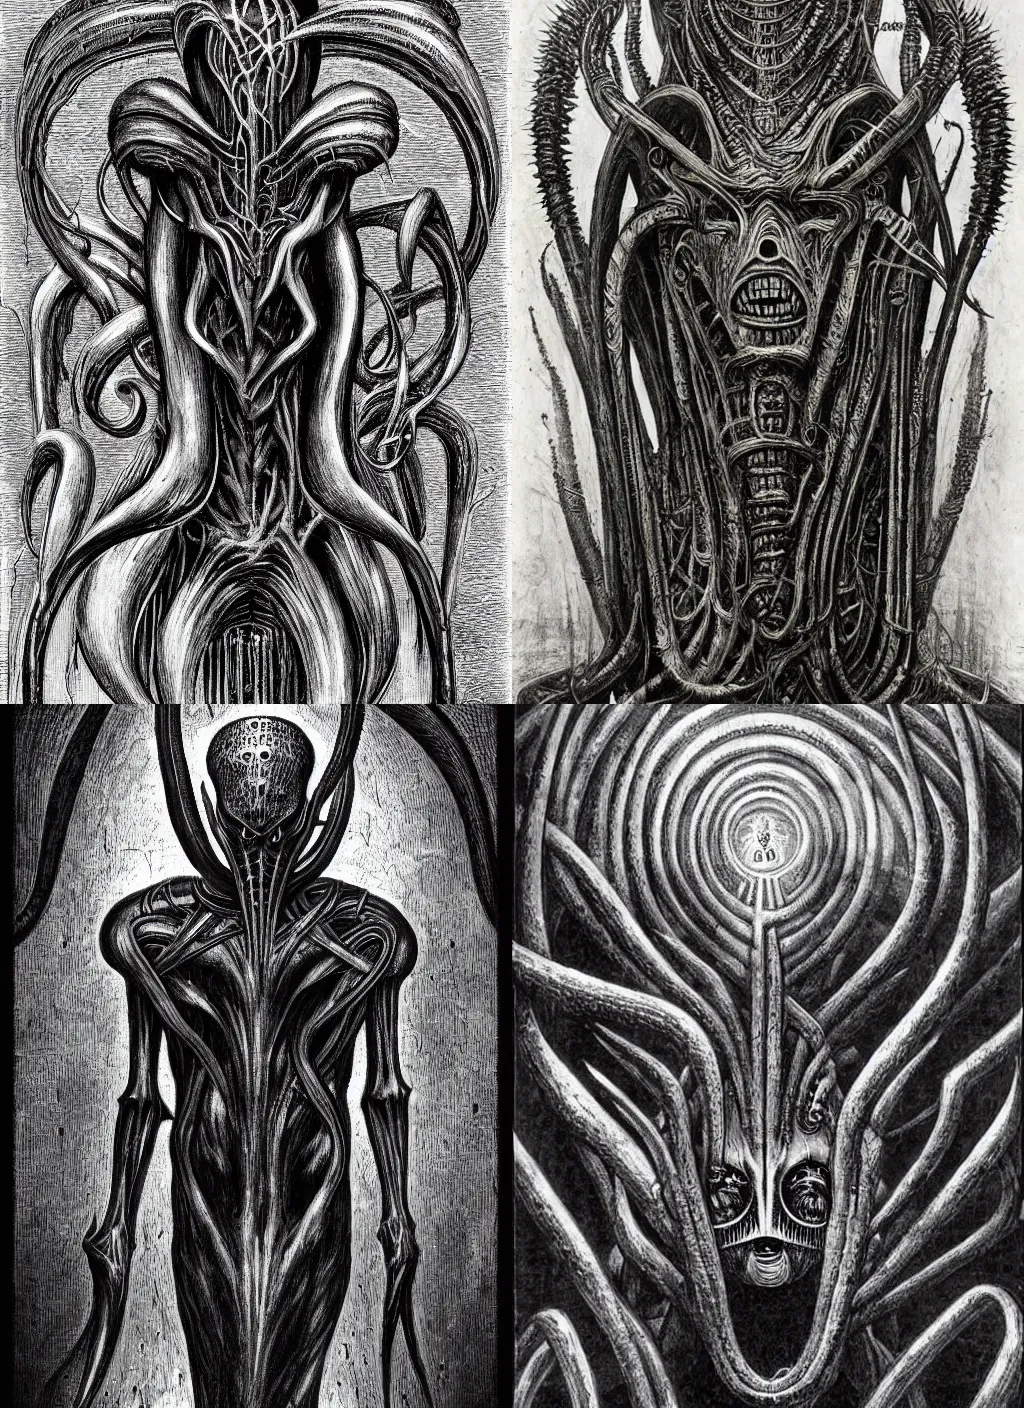 Prompt: Nyarlathotep by H.R. Giger.